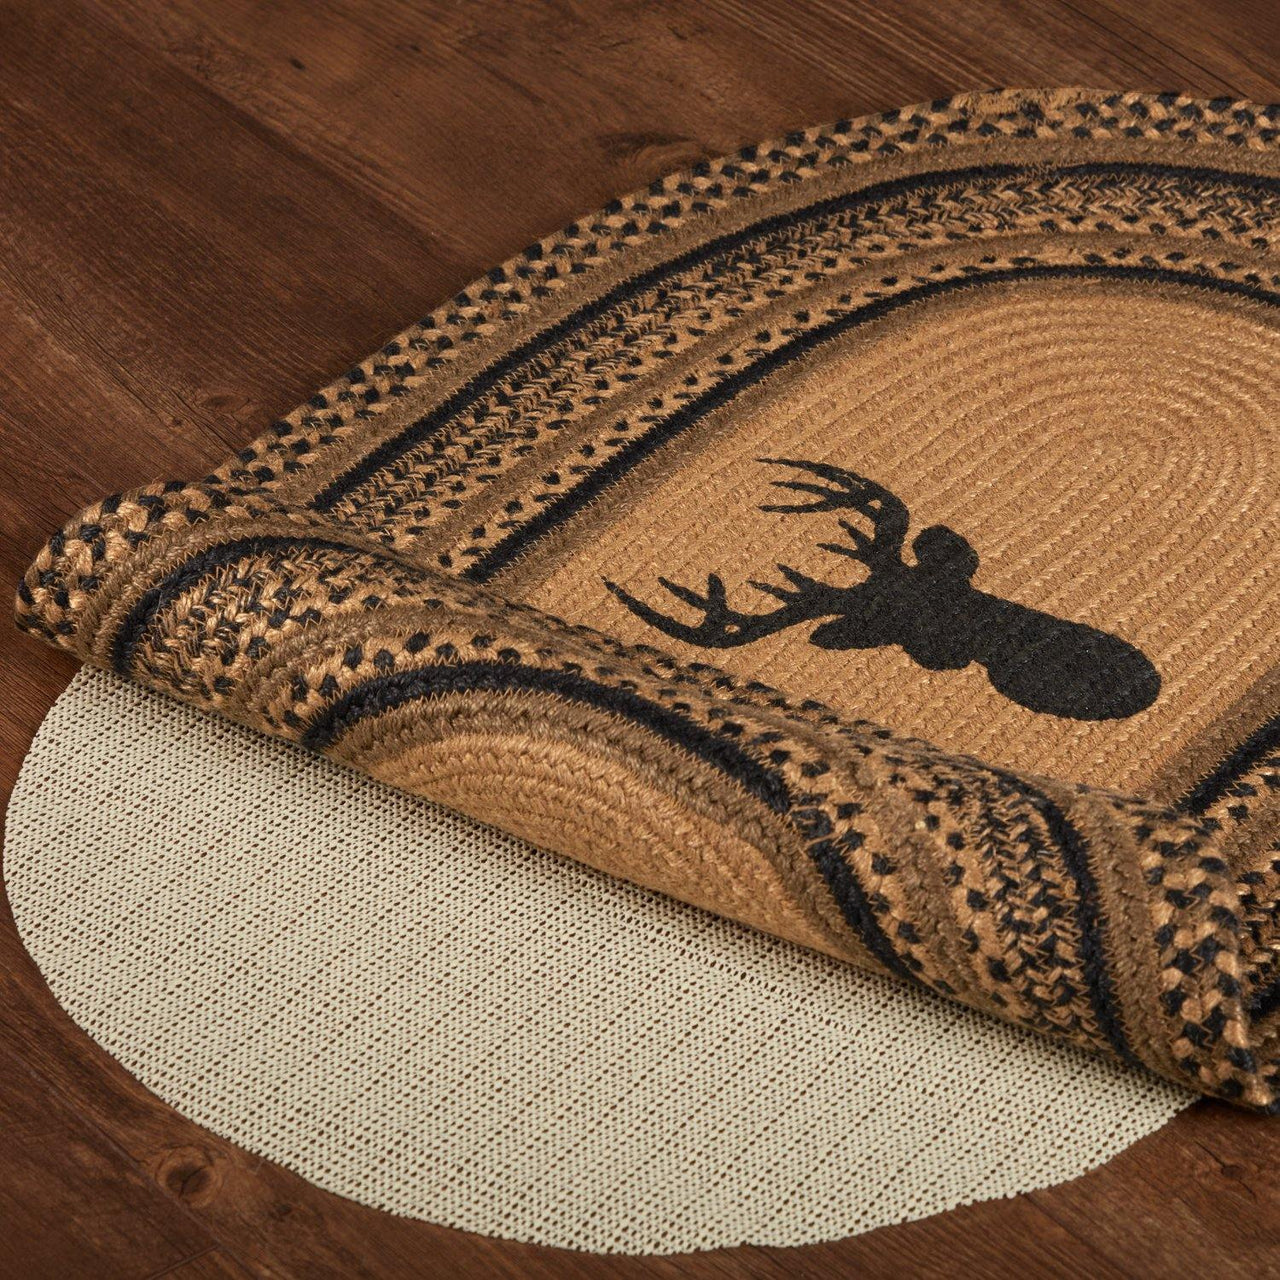 Trophy Mount Jute Braided Rug Oval 20"x30" with Rug Pad VHC Brands - The Fox Decor